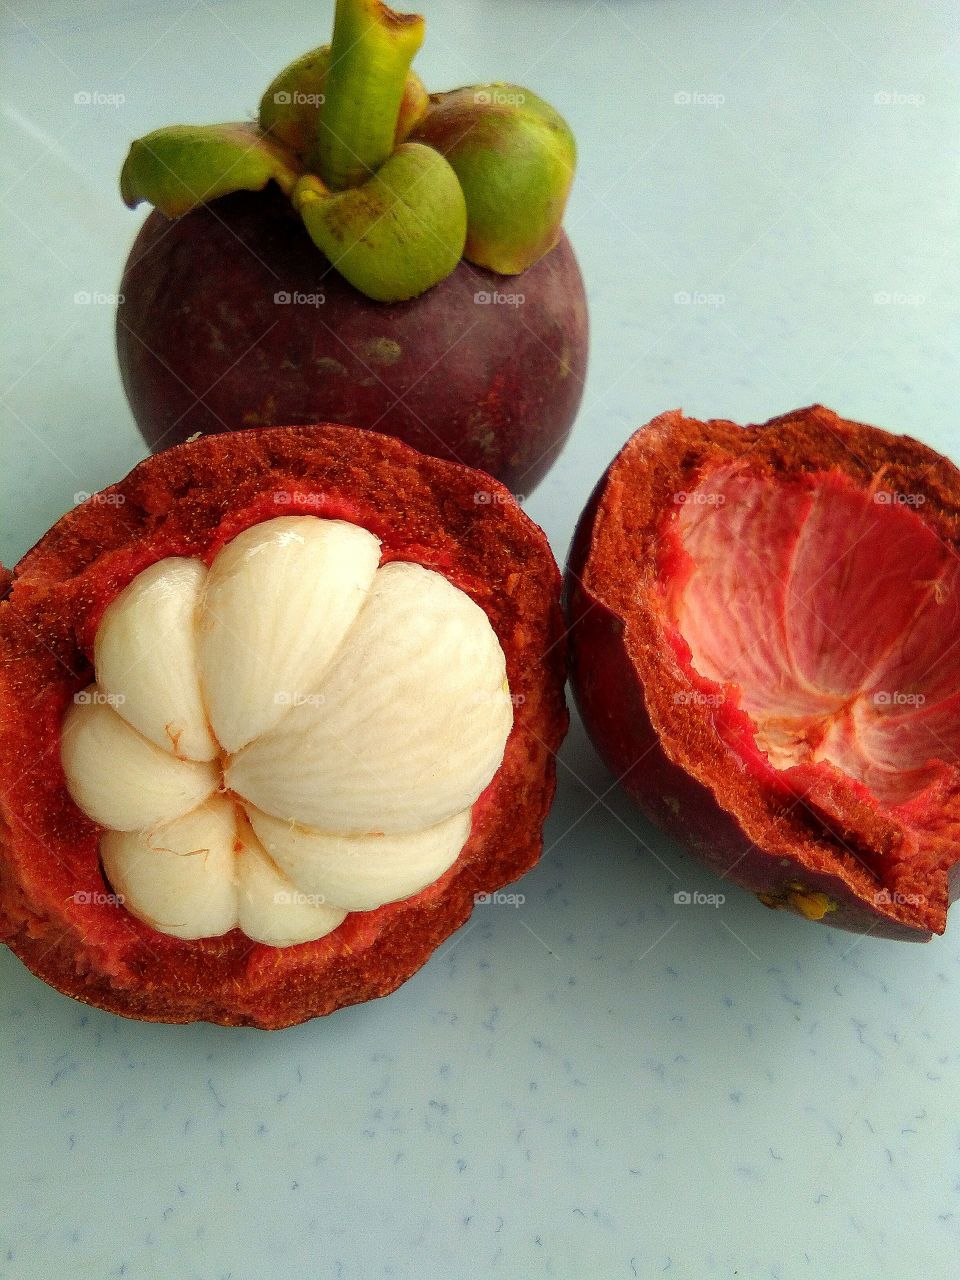 The purple mangosteen (Garcinia mangostana), known simply as mangosteen,is a tropical evergreen treebelieved to have originated in the Sunda Islands of the Malay archipelago and the Moluccas of Indonesia.